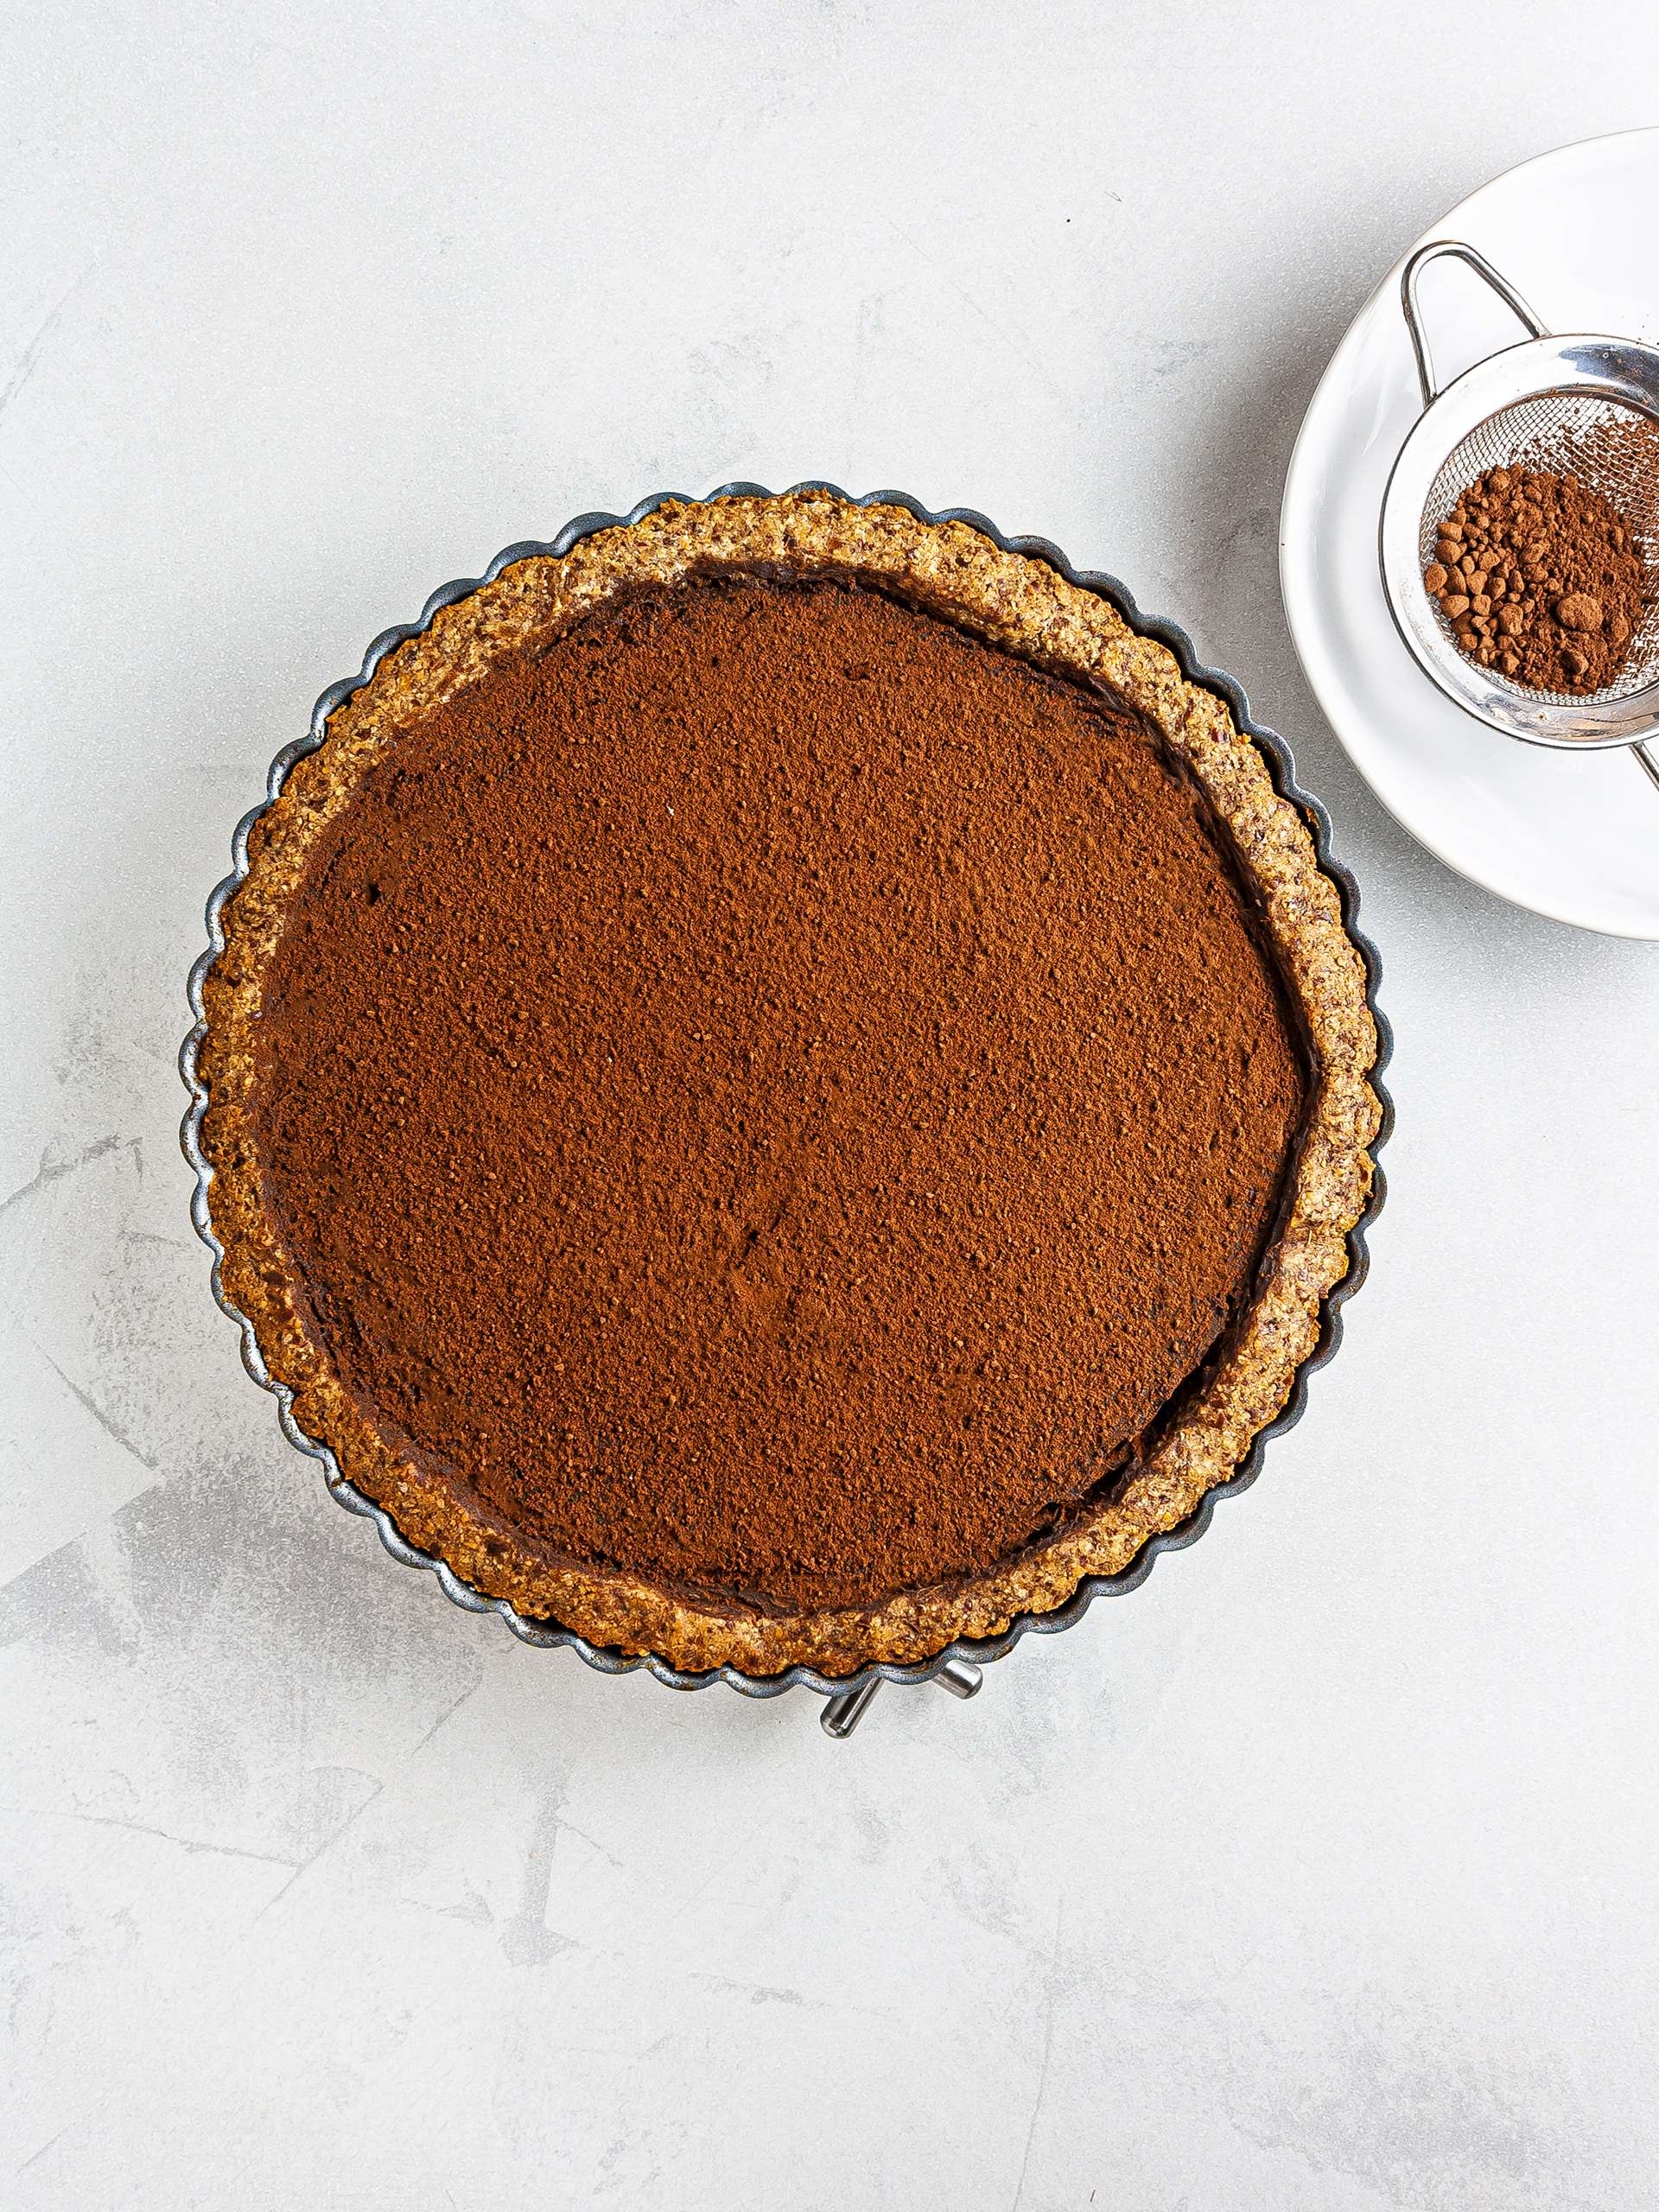 Baked chocolate pie dusted with cocoa powder